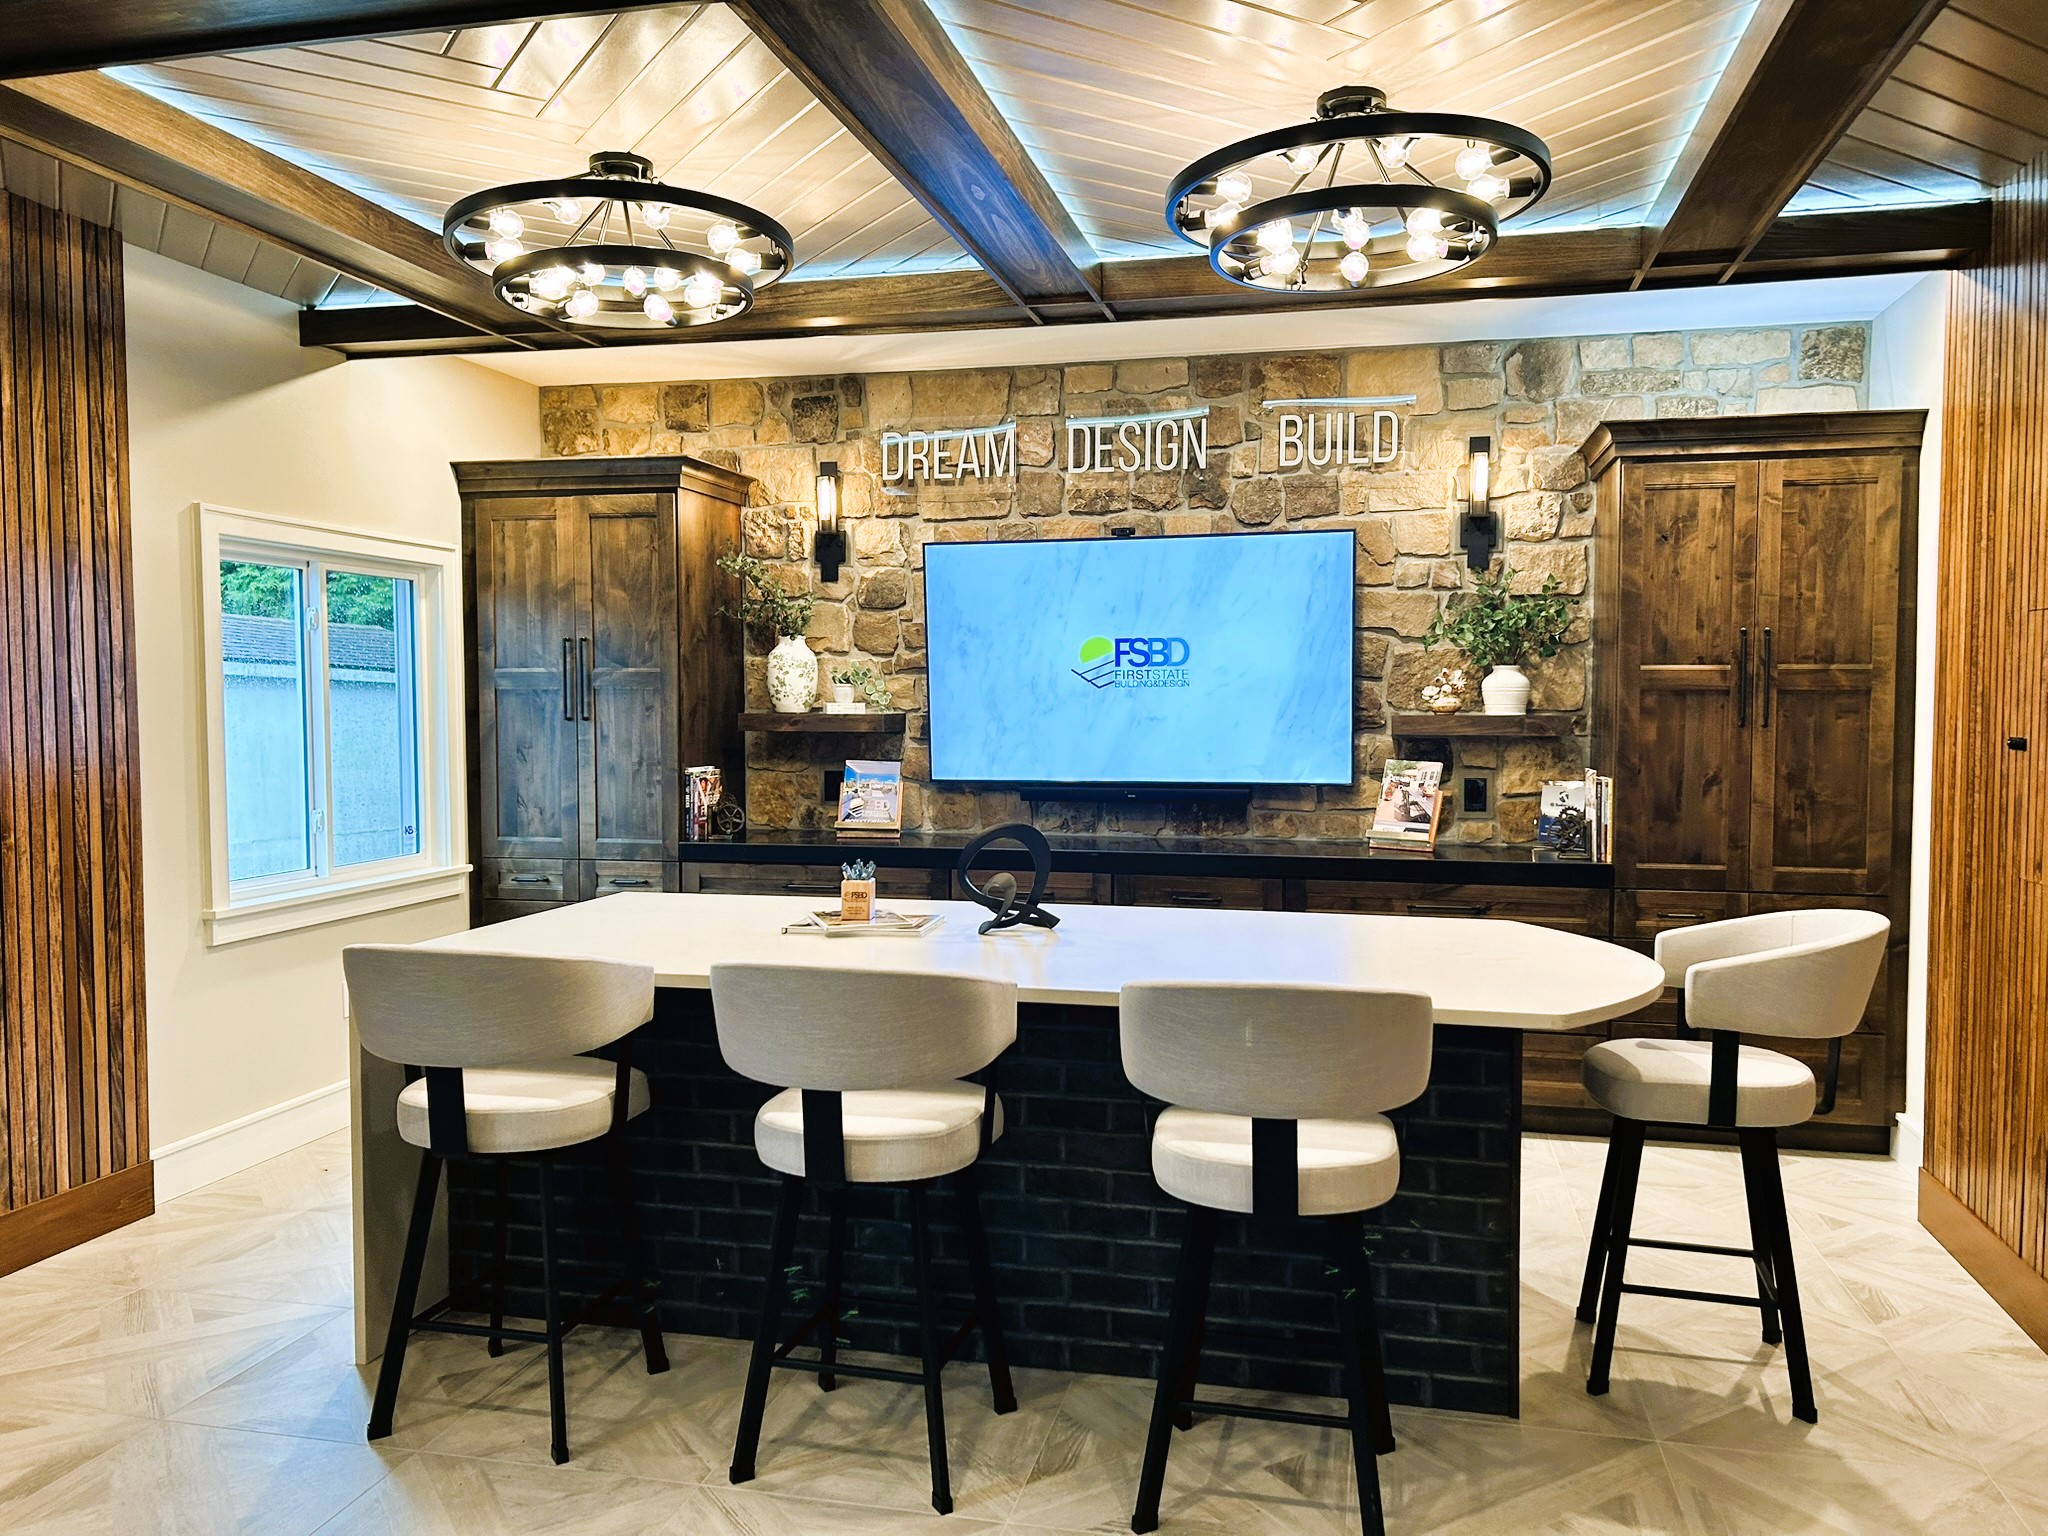 FSBD Showroom with stone walls and wood cabinetry